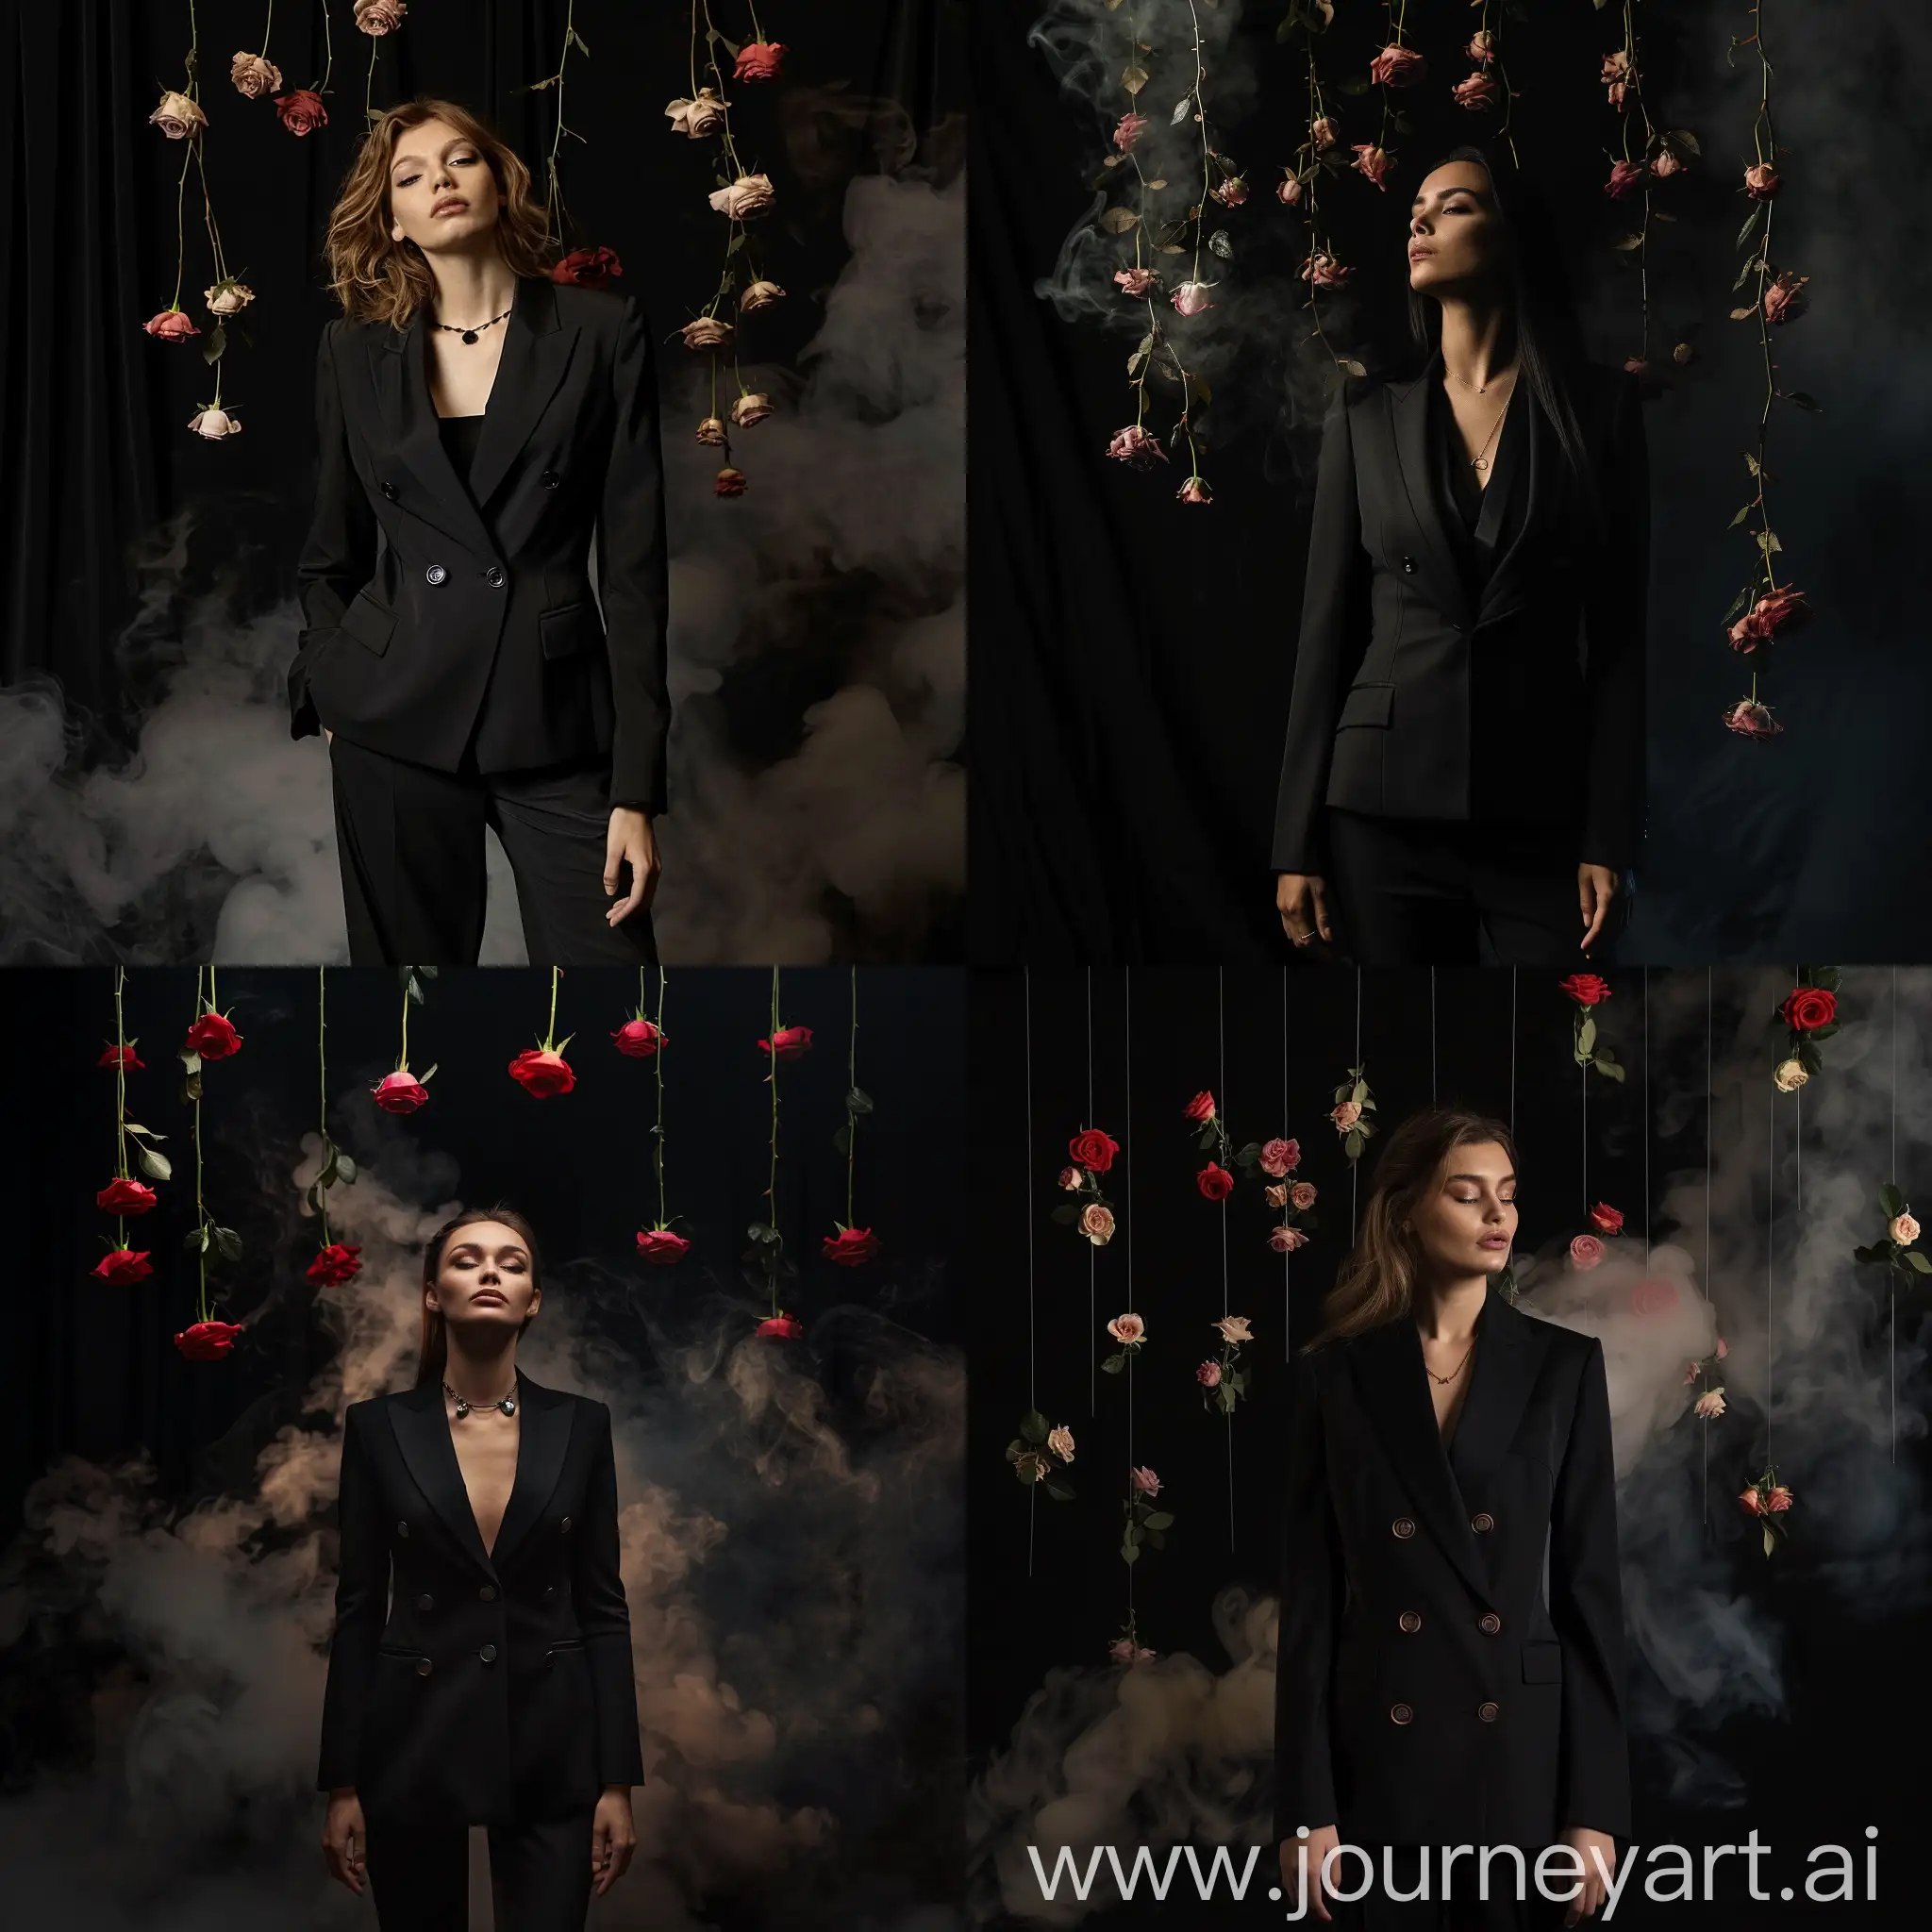 Elegant-Woman-in-Black-Suit-with-Roseinfused-Smoke-on-Dark-Background